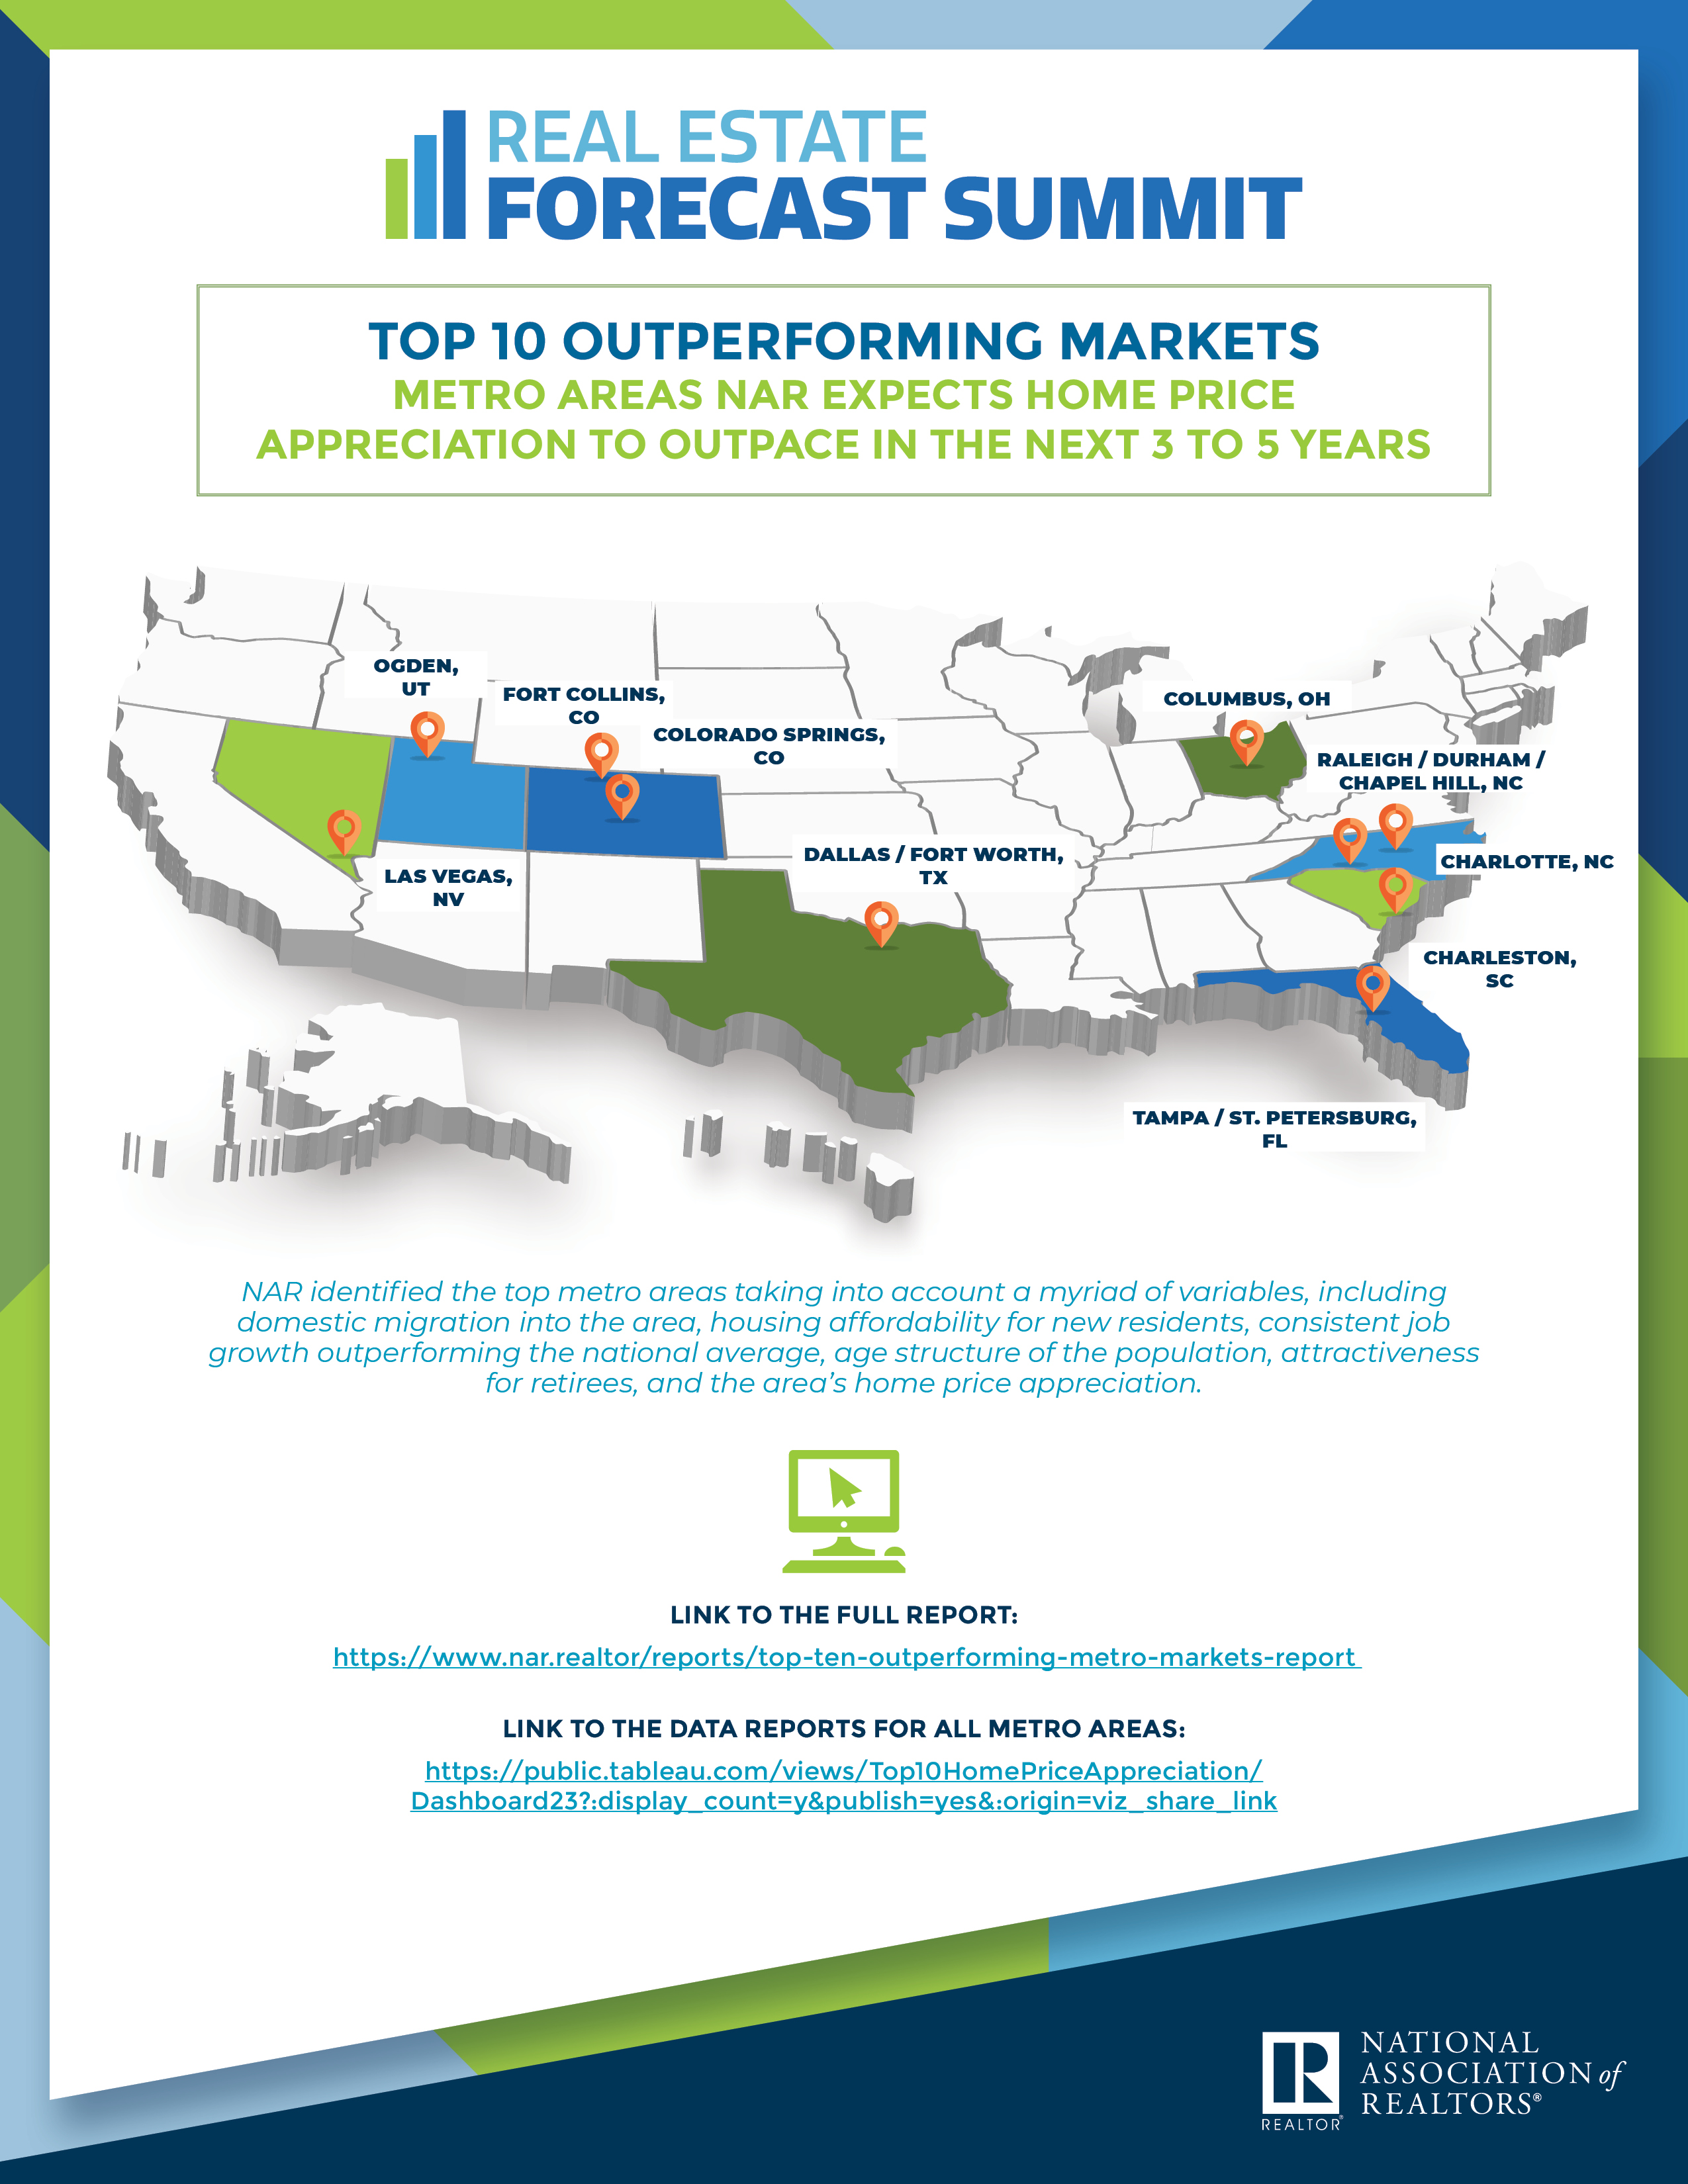 The National Association of Realtors (NAR) has released a list of 10 housing markets that is expects to outperform the rest of the rest of the nation during the coming three to five years